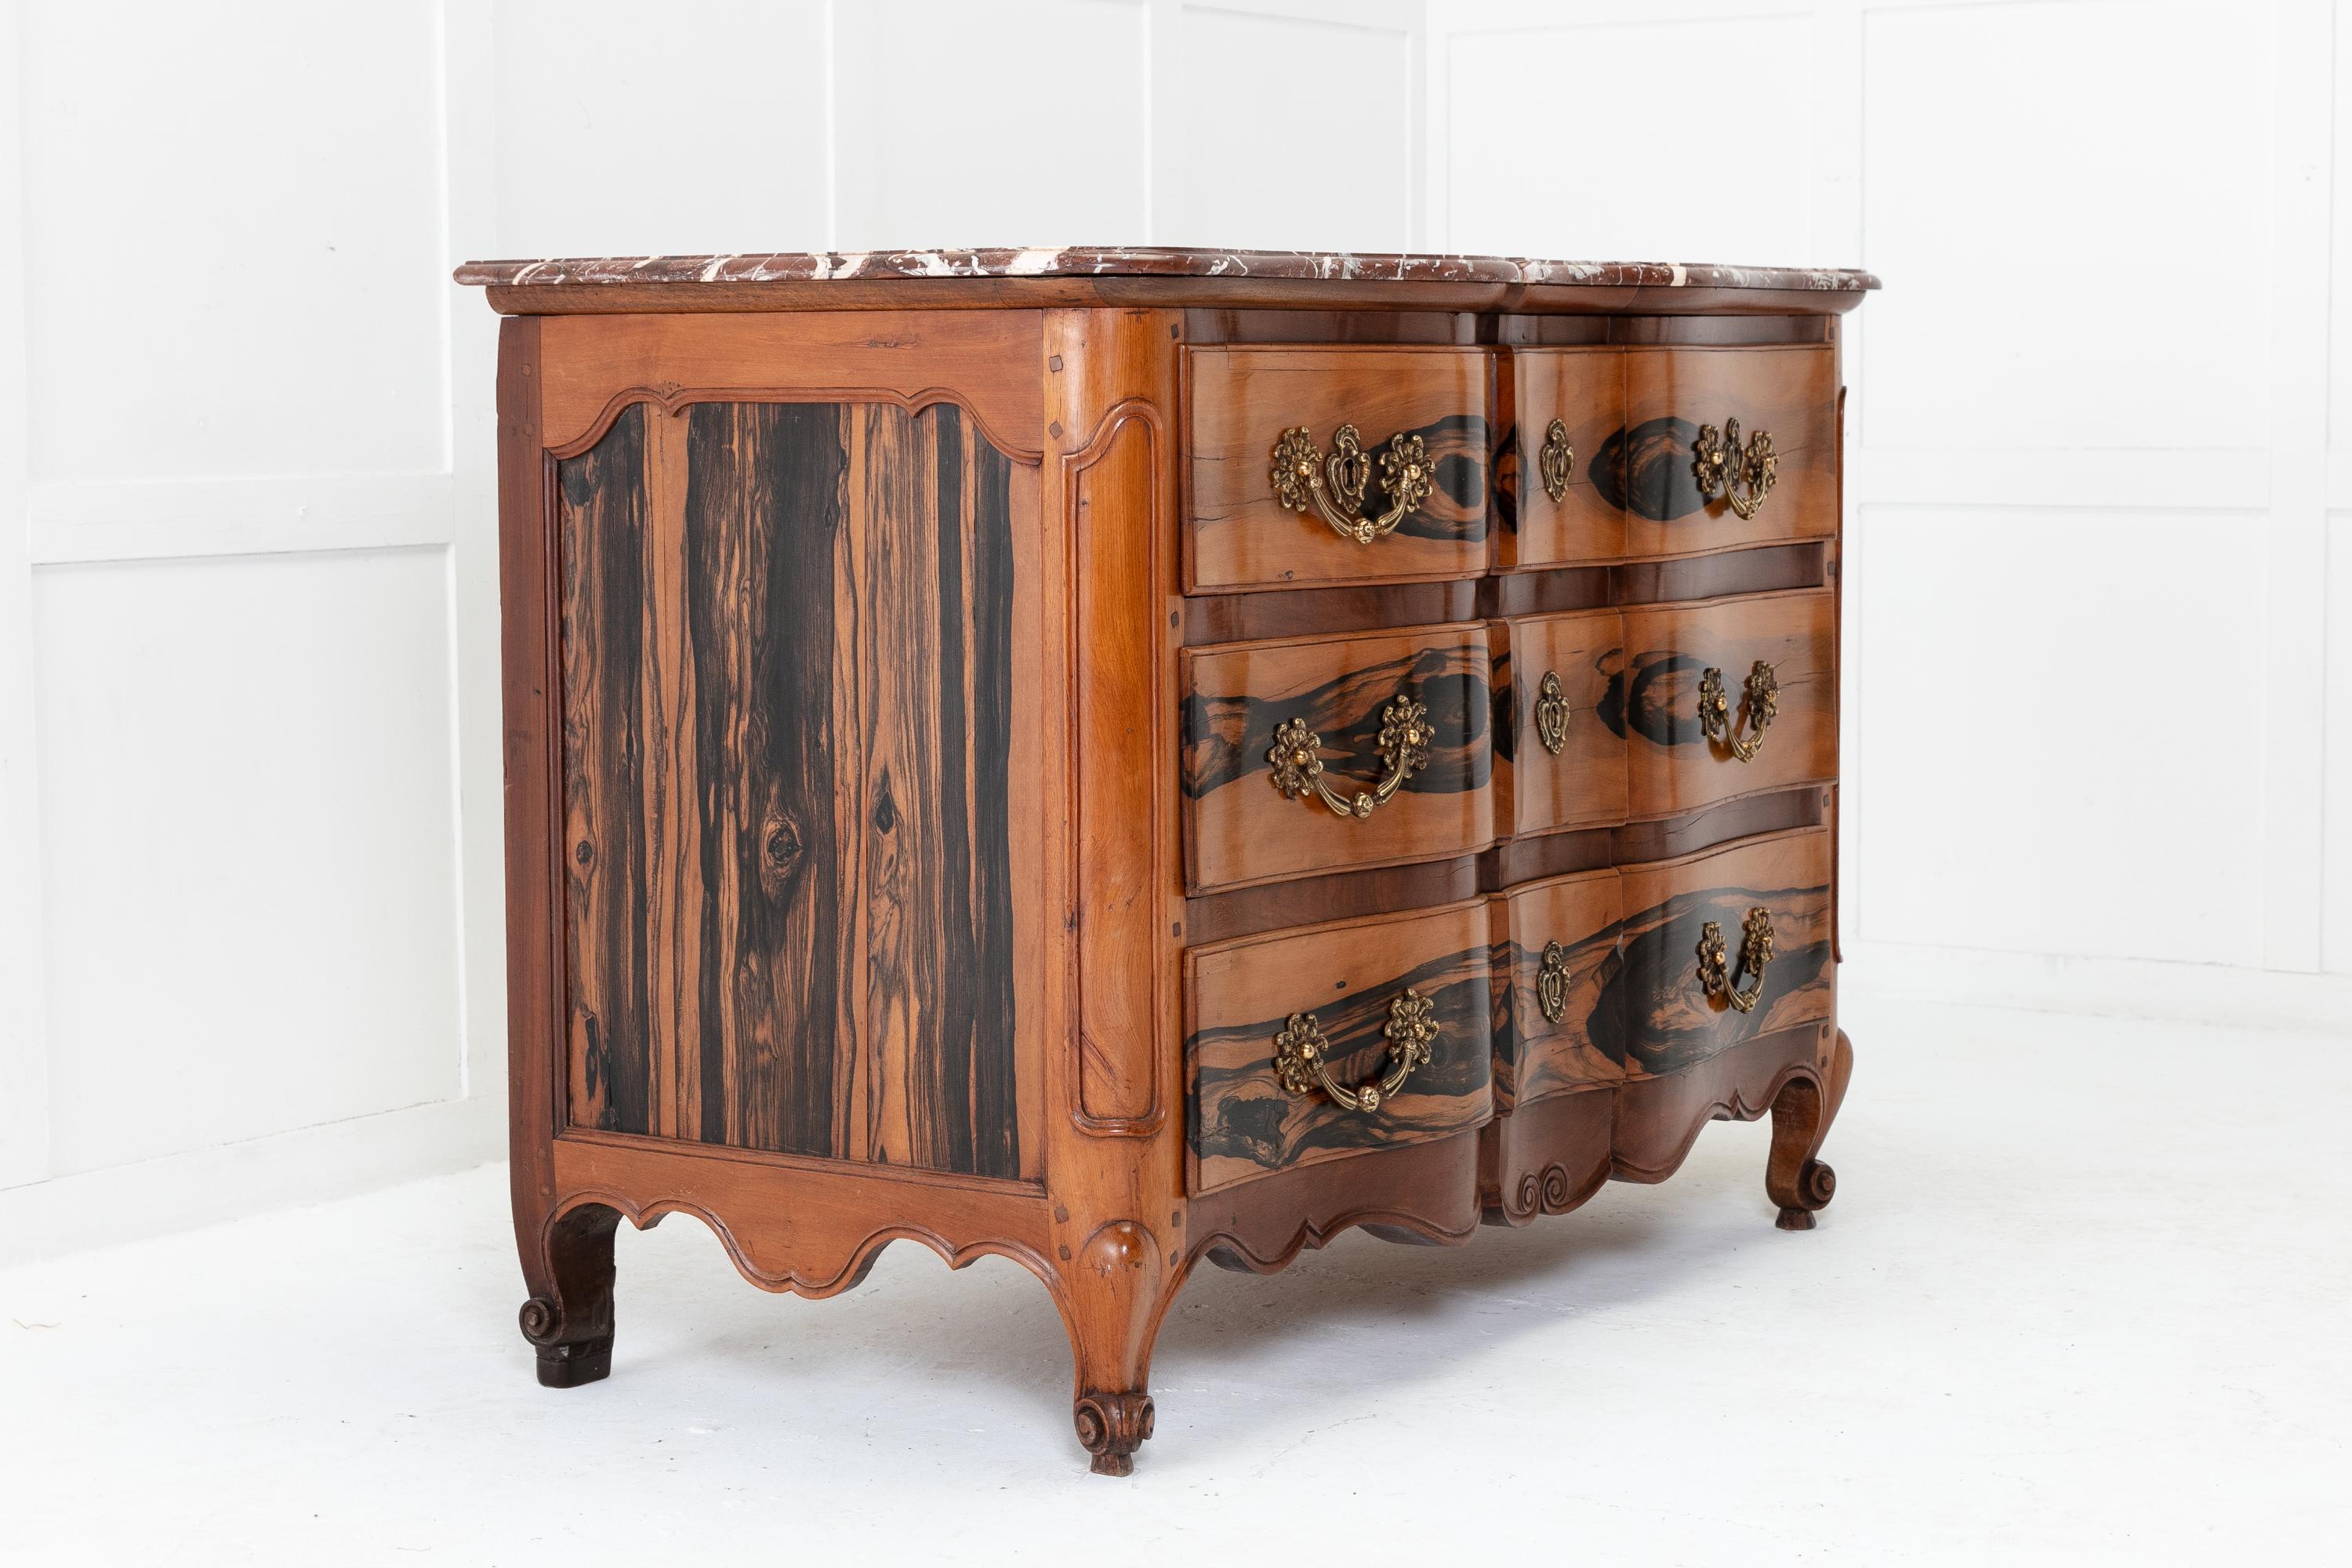 A stunning 18th century French guaiac wood and walnut commode with shaped, marble top. Having a very nice shaped front and moulded panel sides, with excellent use of solid guaiac wood. Having moulded, canted corner panels to the front, with three